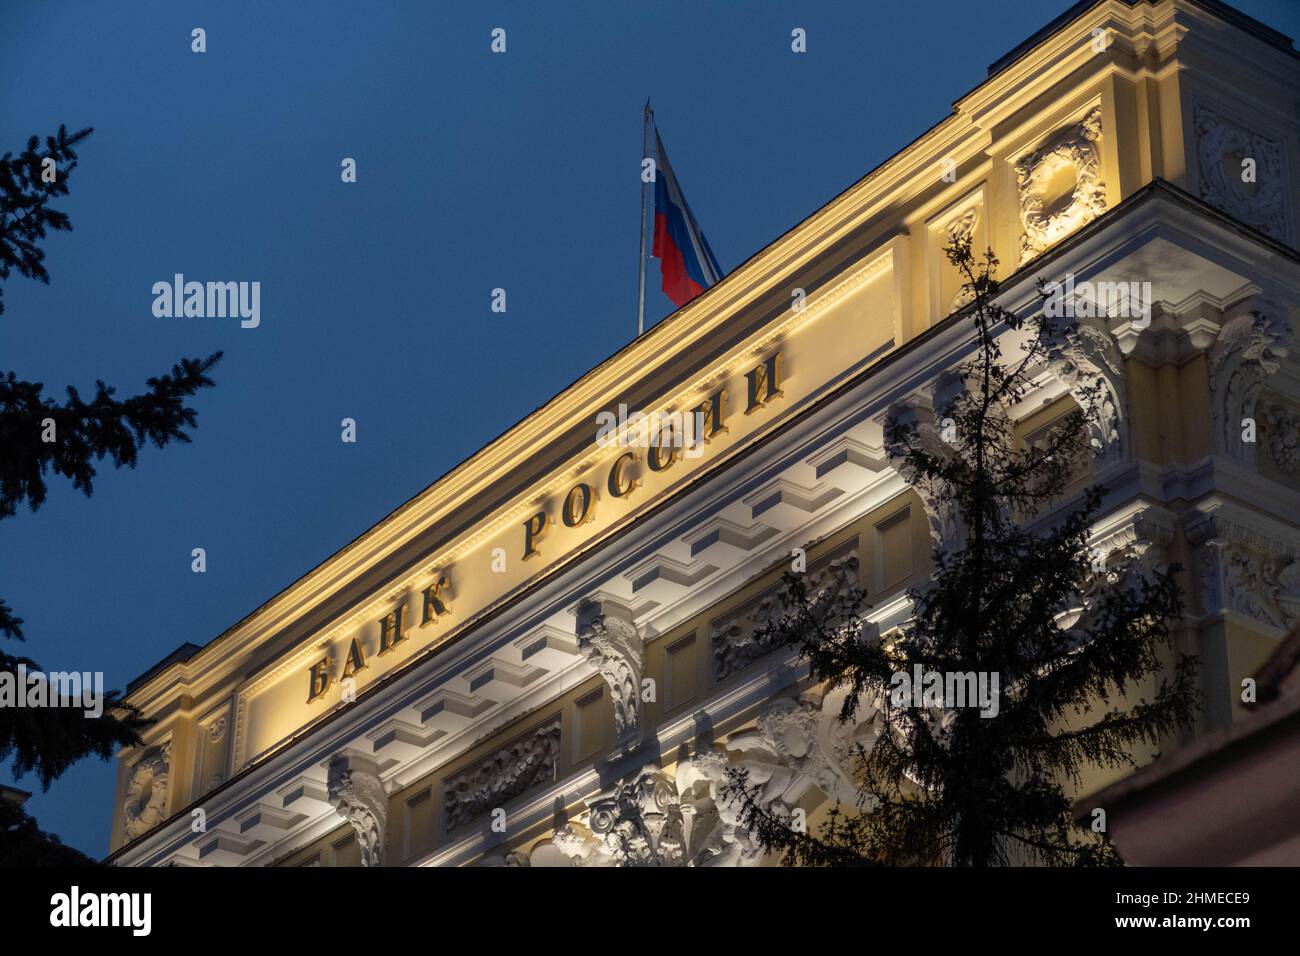 The Central Bank of Russia in the evening in winter 2022 Stock Photo